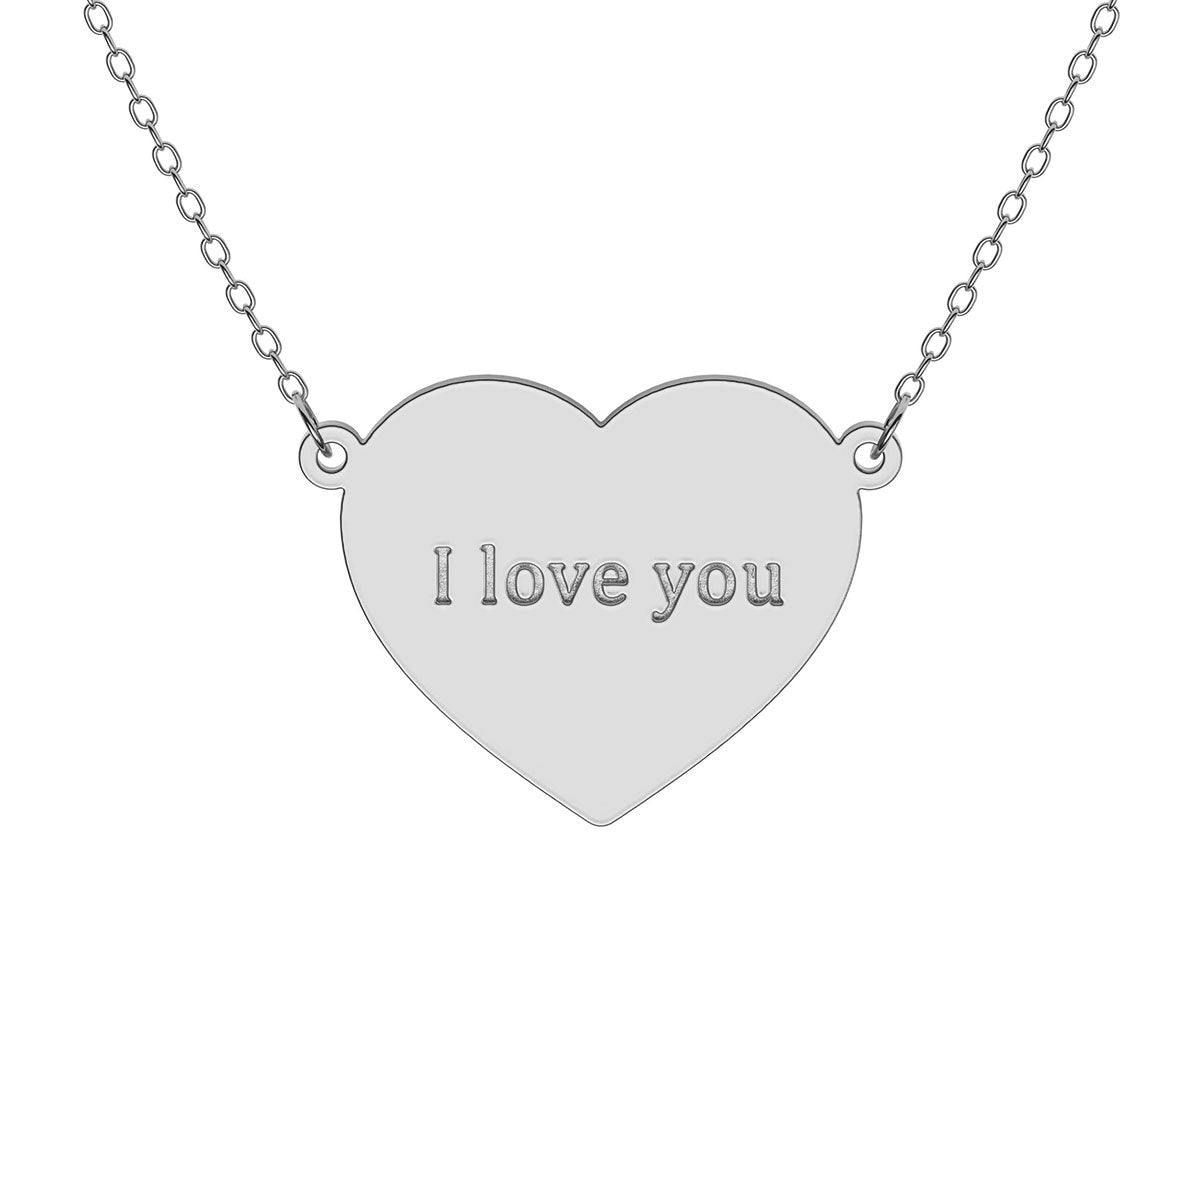 Heart Necklace with Personalized Engraving